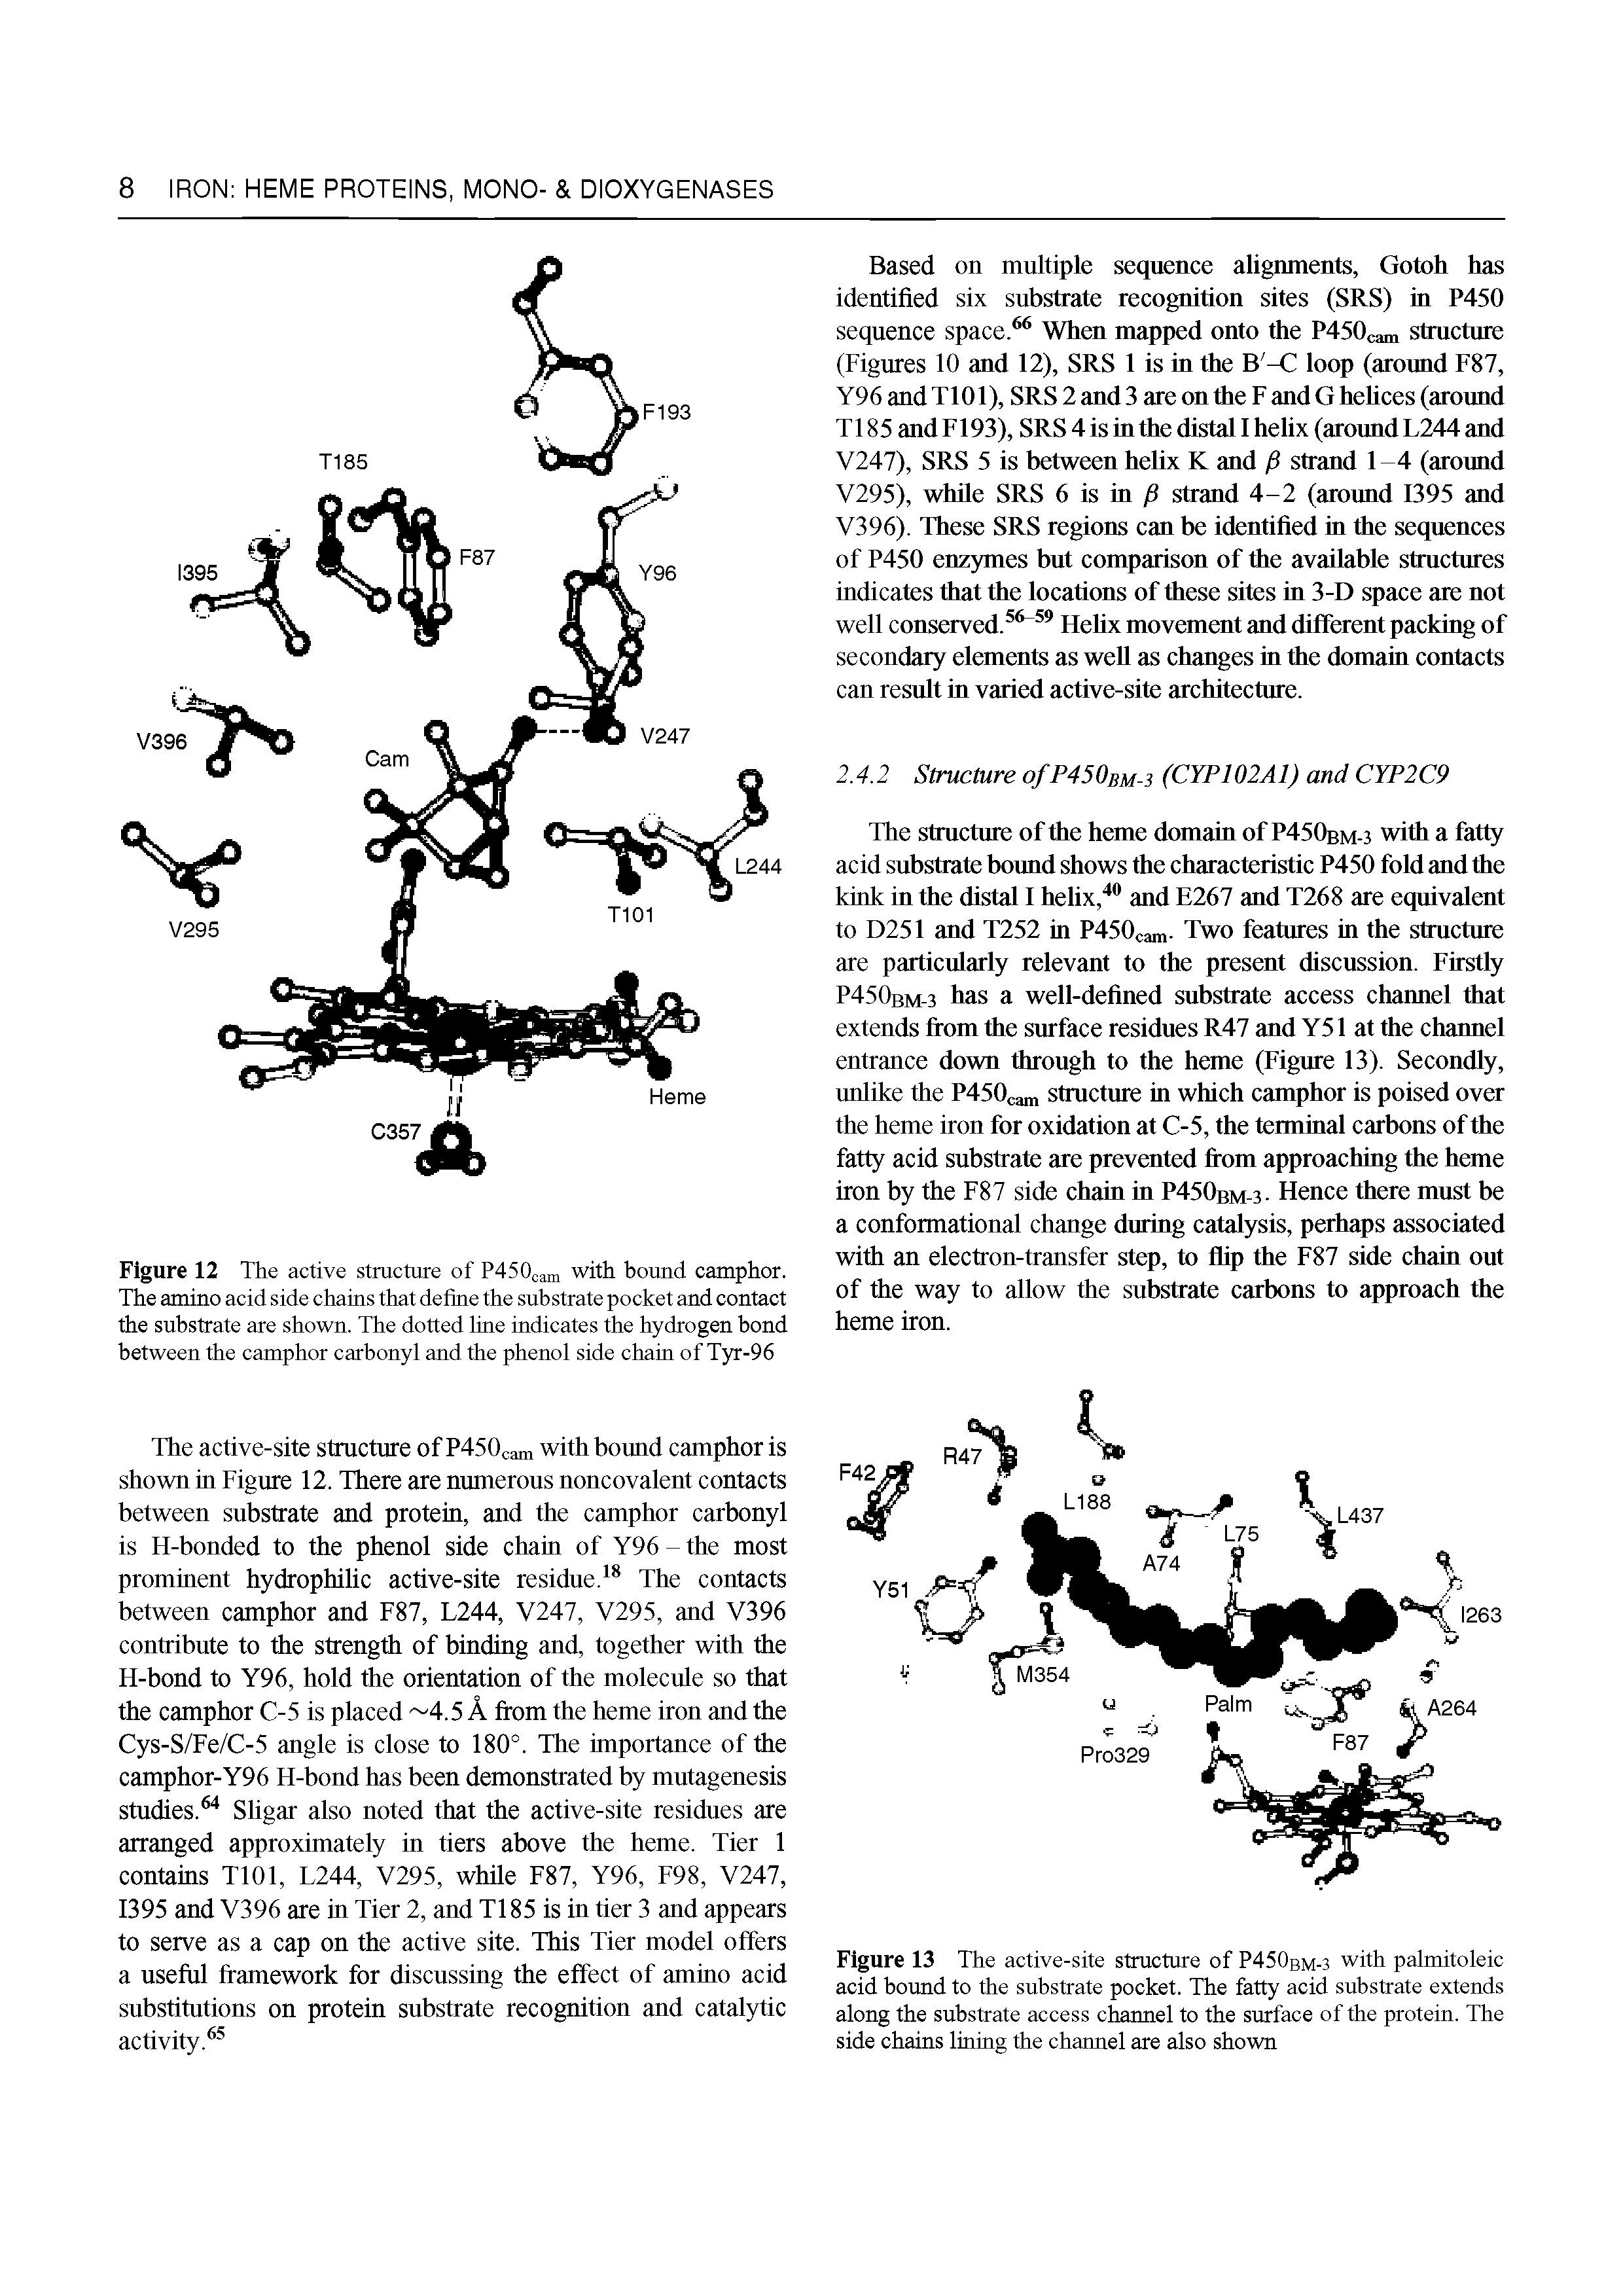 Figure 12 The active structure of P450cam with bound camphor. The amino acid side chains that define the substrate pocket and contact the substrate are shown. The dotted line indicates the hydrogen bond between the camphor carbonyl and the phenol side chain of Tyr-96...